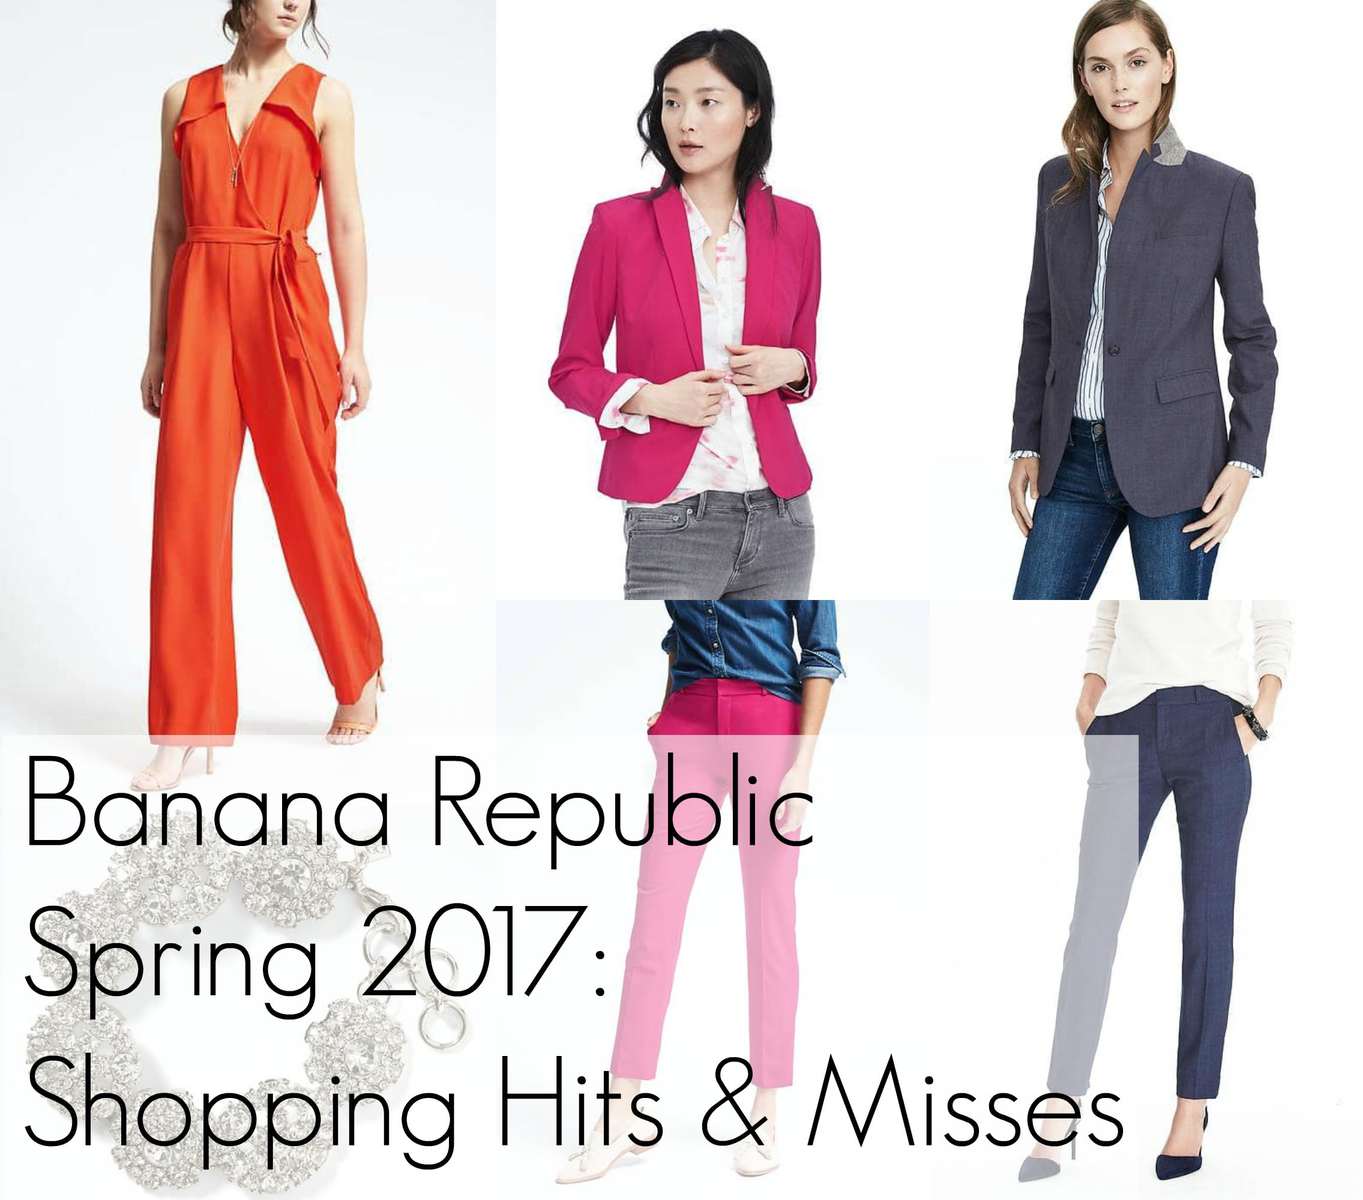 Is Banana Republic's New Style Worth The Price? - The Mom Edit